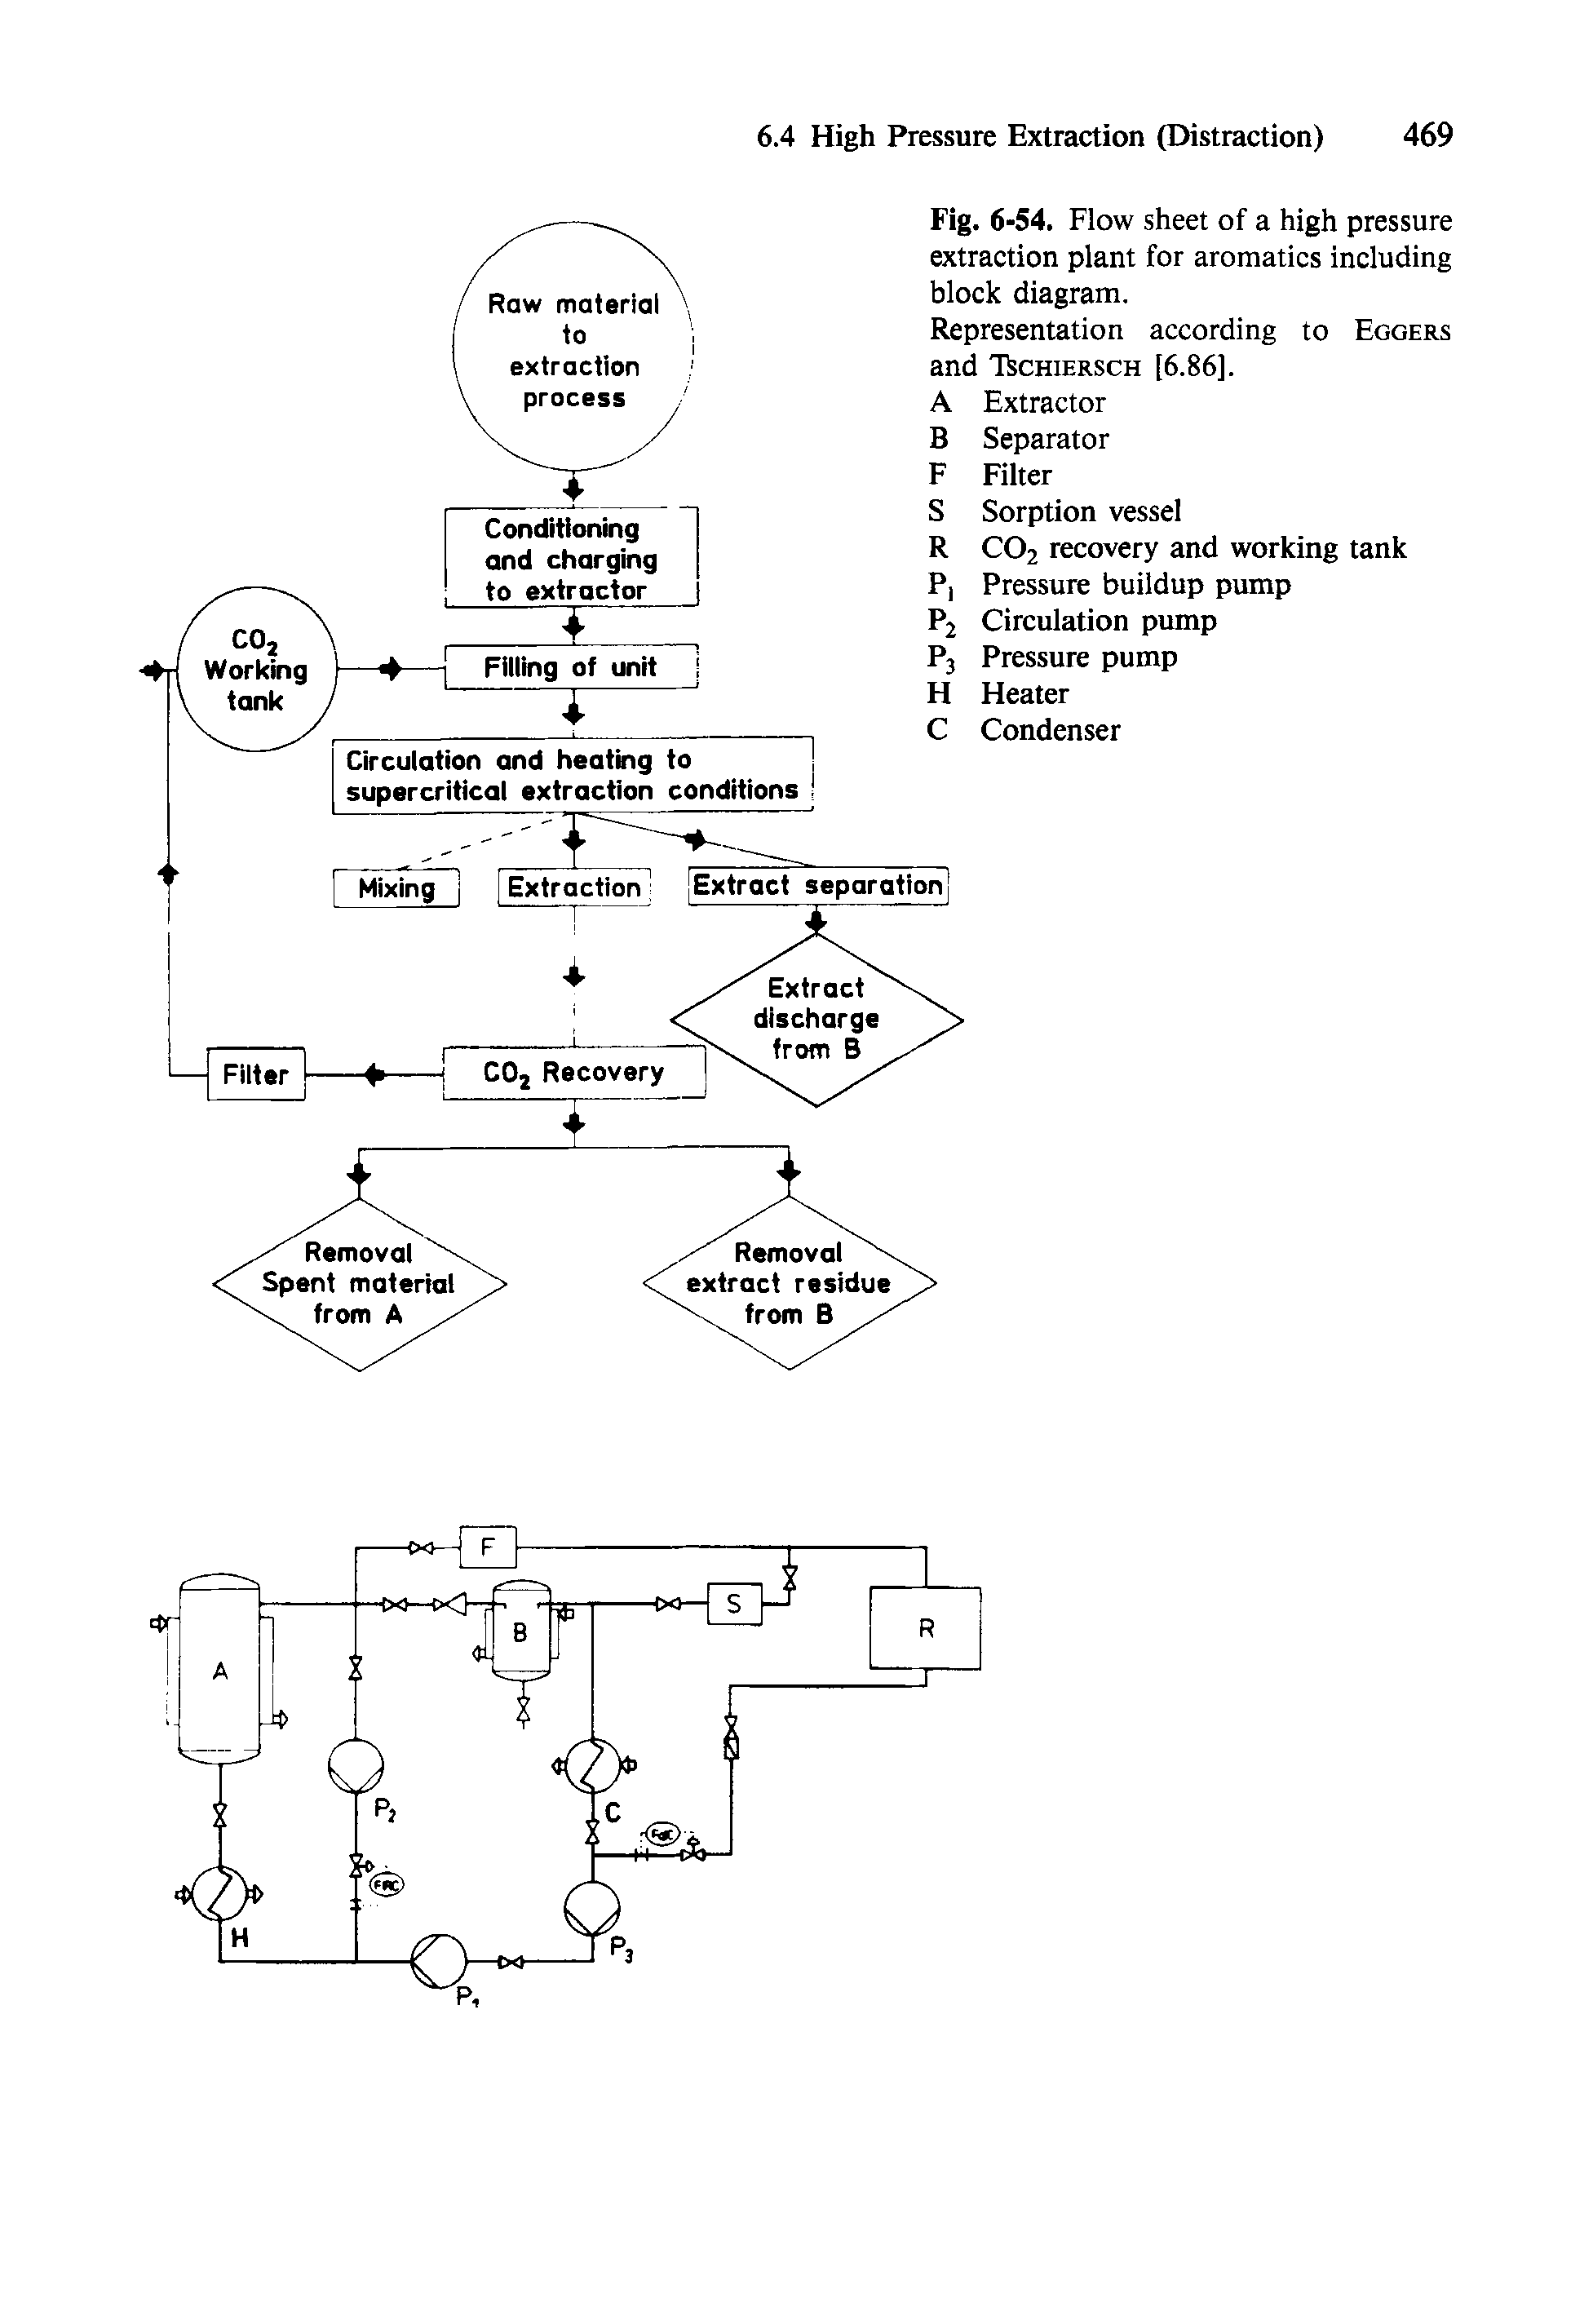 Fig. 6-54. Flow sheet of a high pressure extraction plant for aromatics including block diagram.